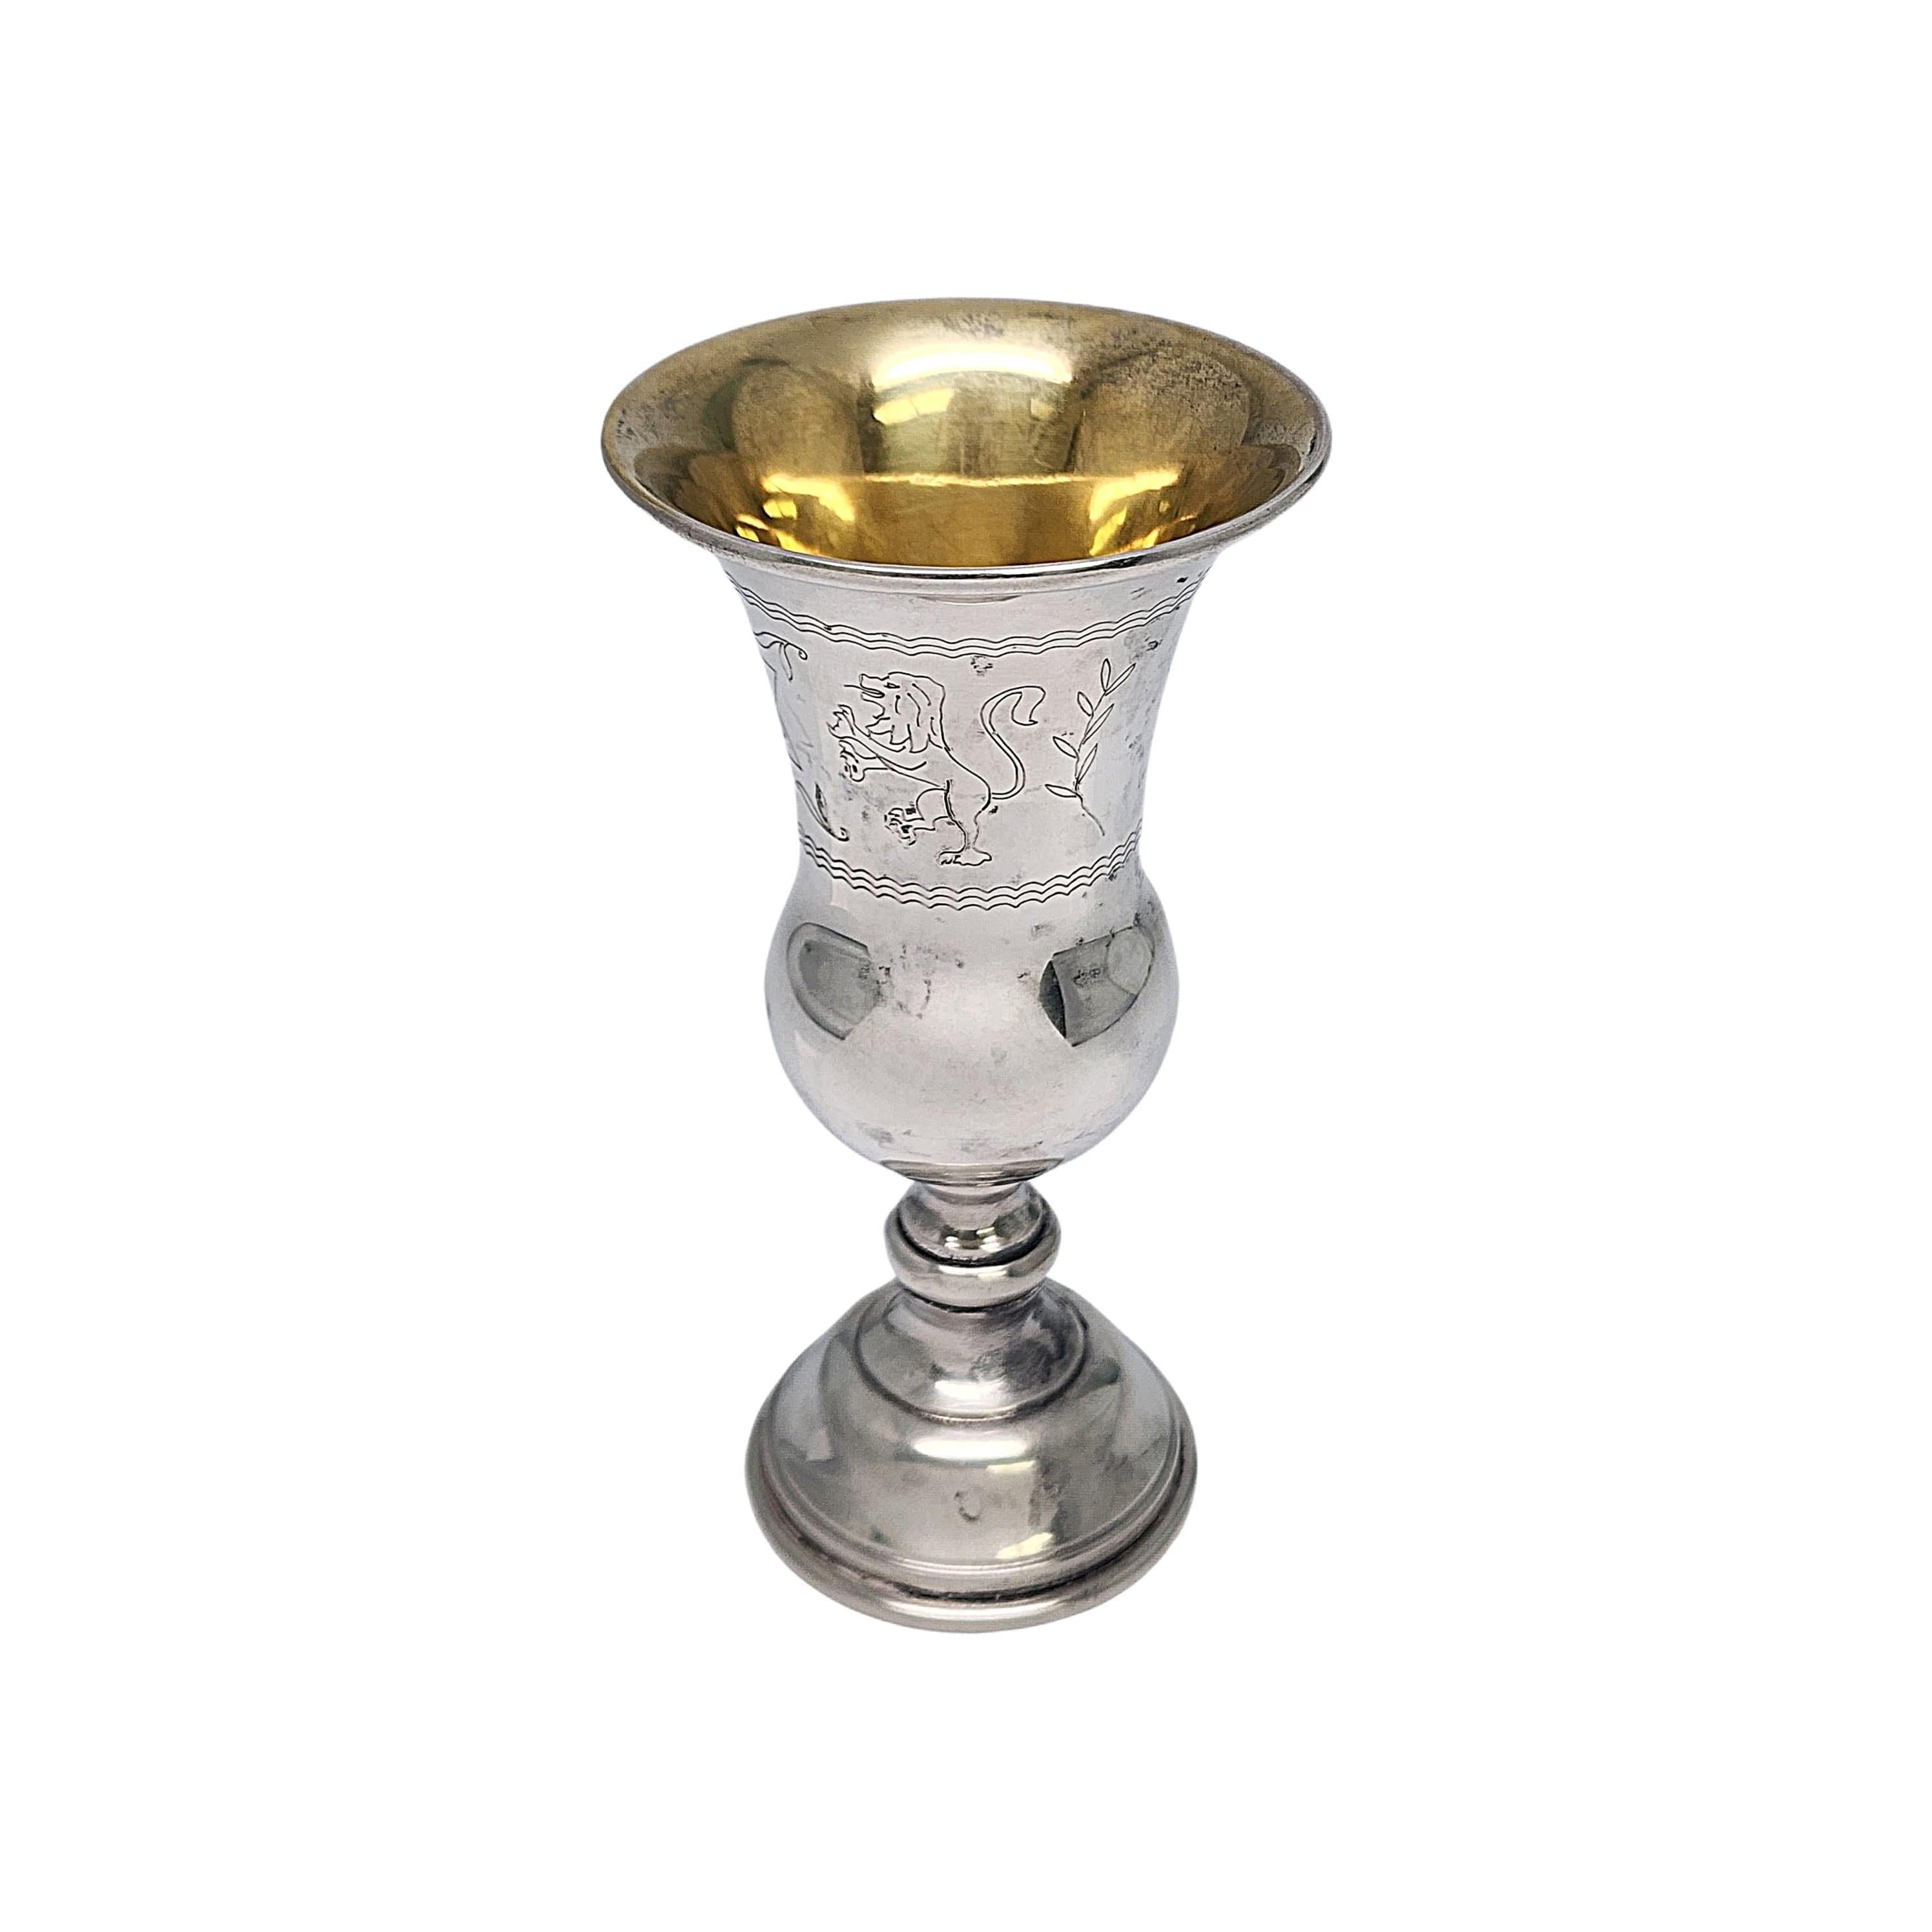 Sterling silver with gold wash interior kiddush cup by Web with monogram.

Monogram appears to be GM

With a gold wash cup interior, this kiddush cup features an etched Star of David flanked by 2 lions and leaves.

Measures approx 4 3/8